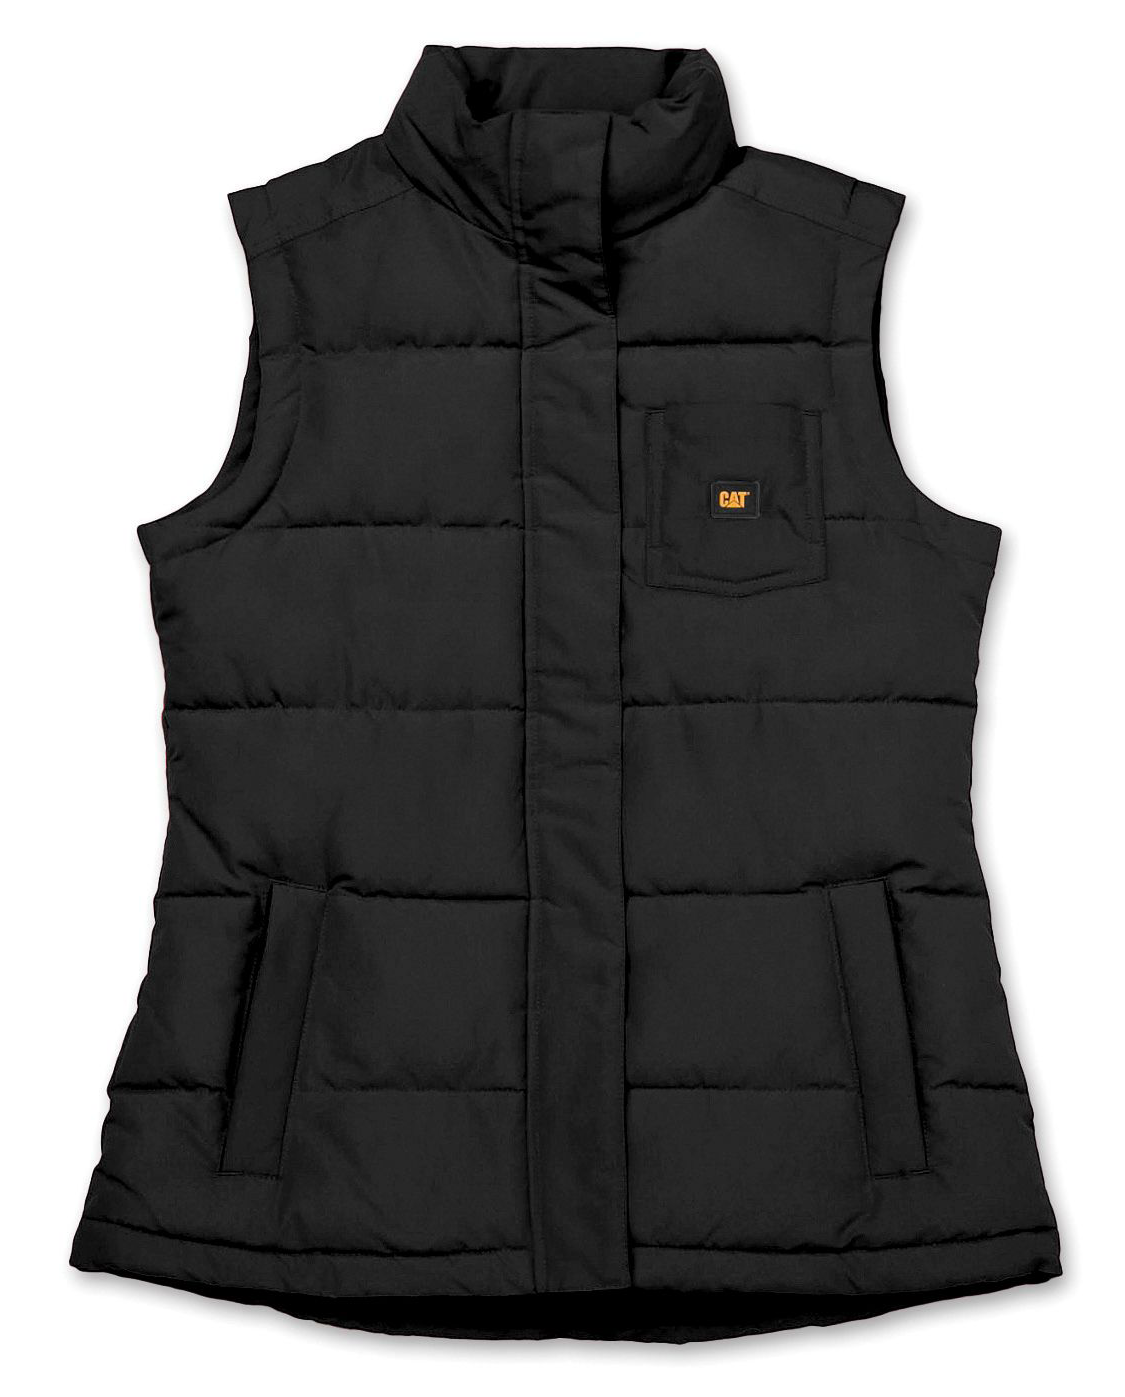 Marshlands Outlet - Now available in store, our Carhartt Ladies